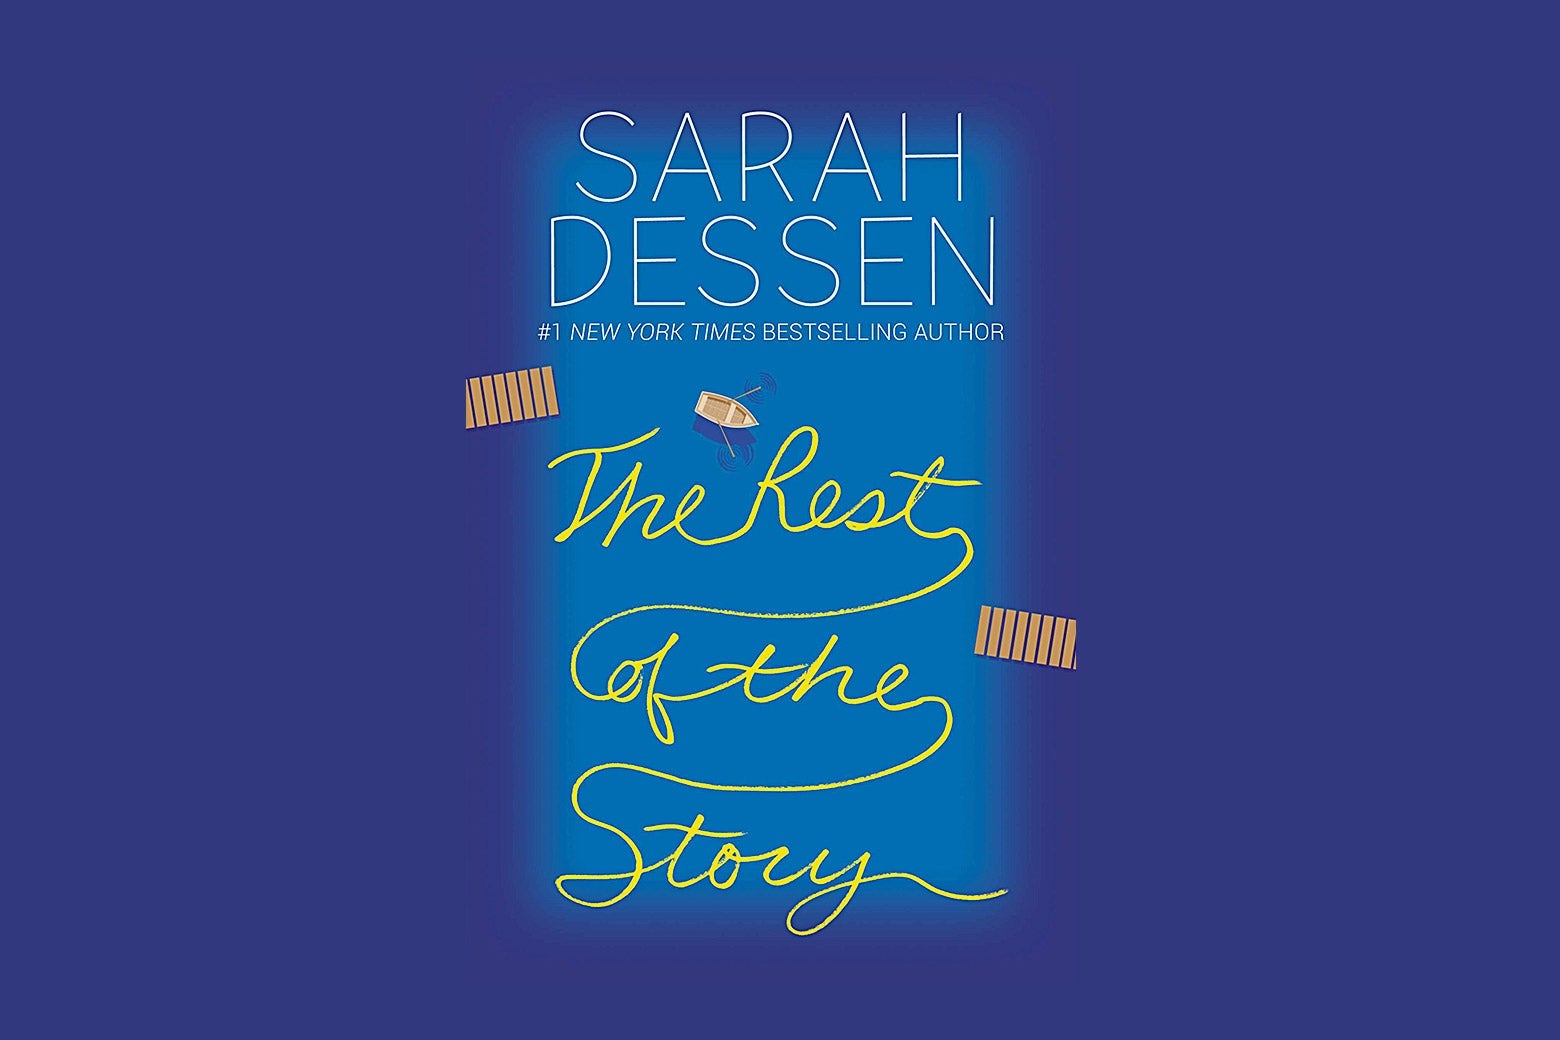 Sarah Dessen's most recent book, The Rest of the Story